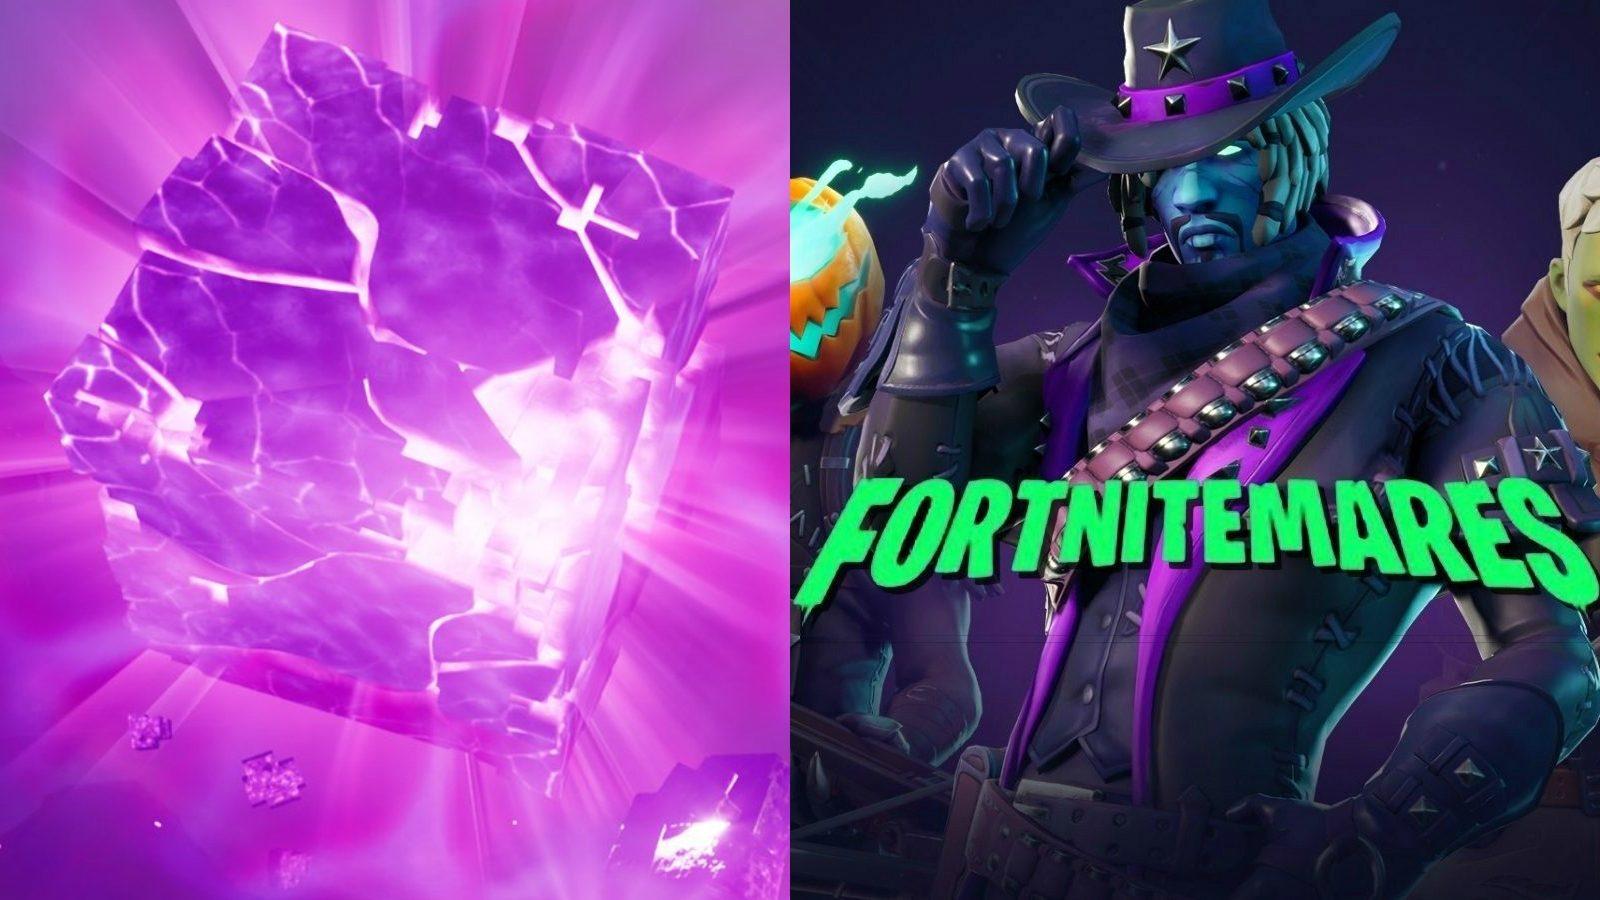 How To Watch The Fortnitemares One Time Live Cube Event